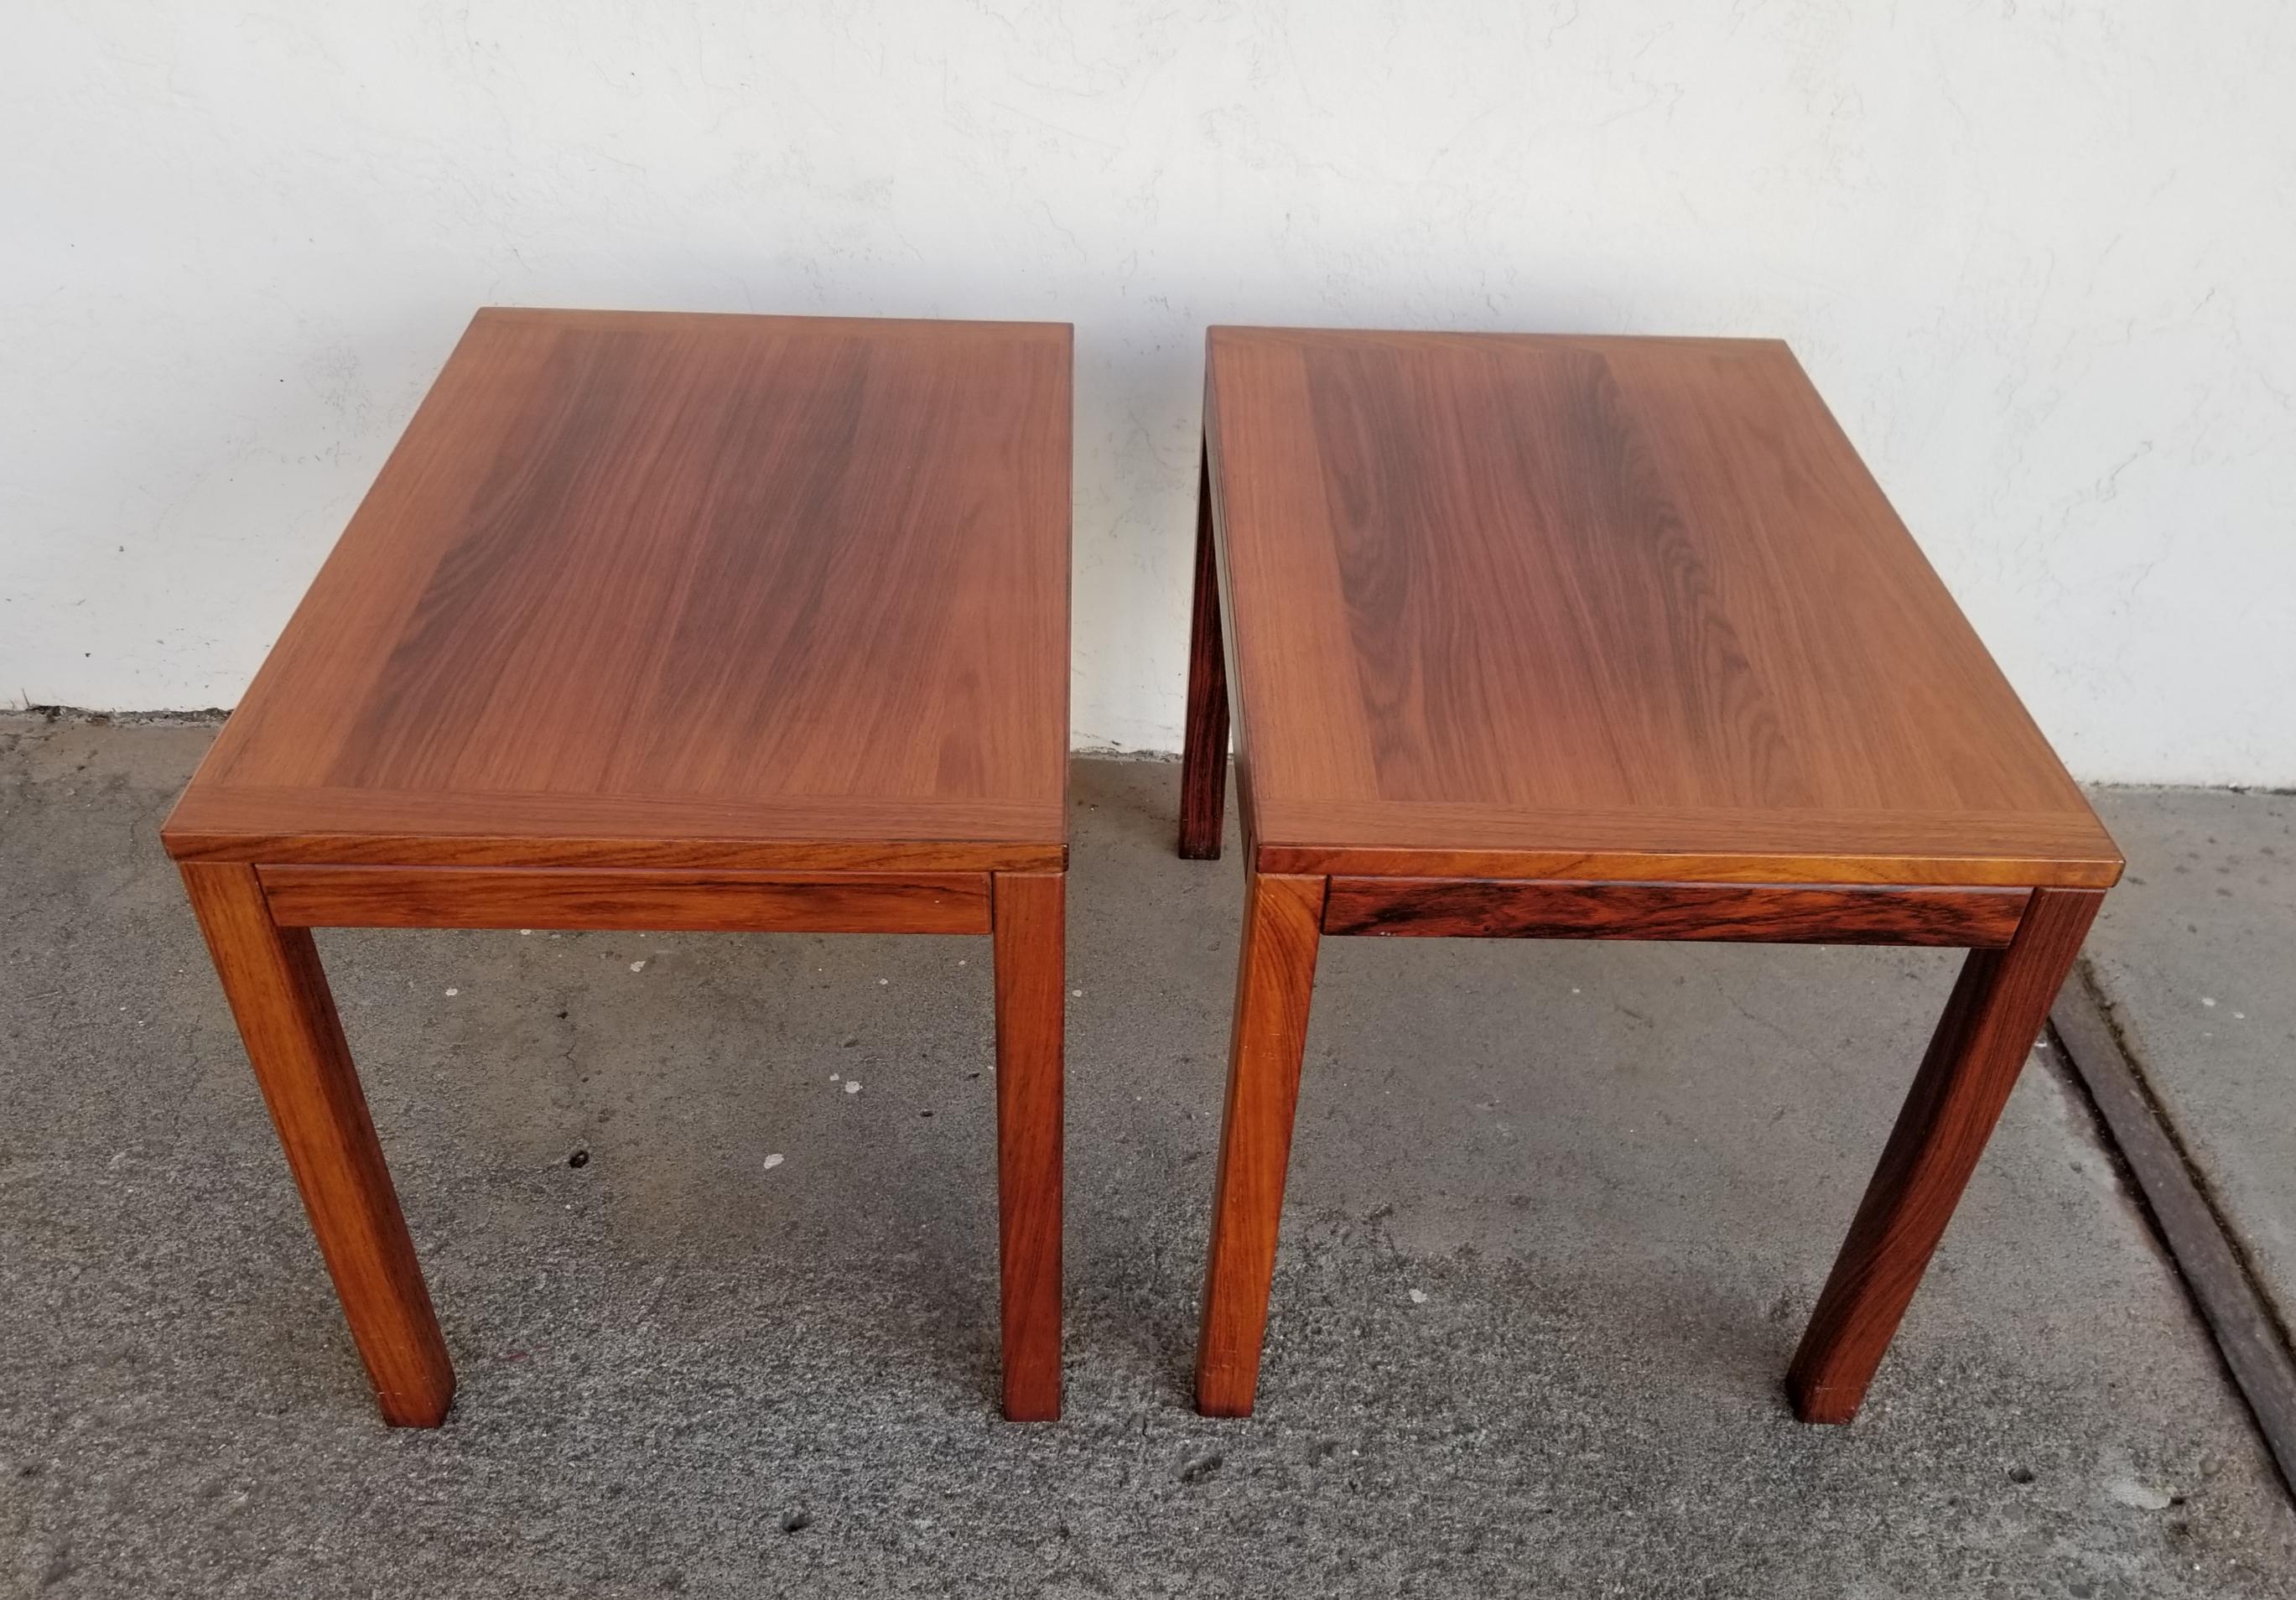 Rectangular side tables by Vejle Stole, Denmark. Crafted with beautiful grain, solid rosewood legs and apron. Very good original condition and original finish. Each table branded with makers mark. 1970's.